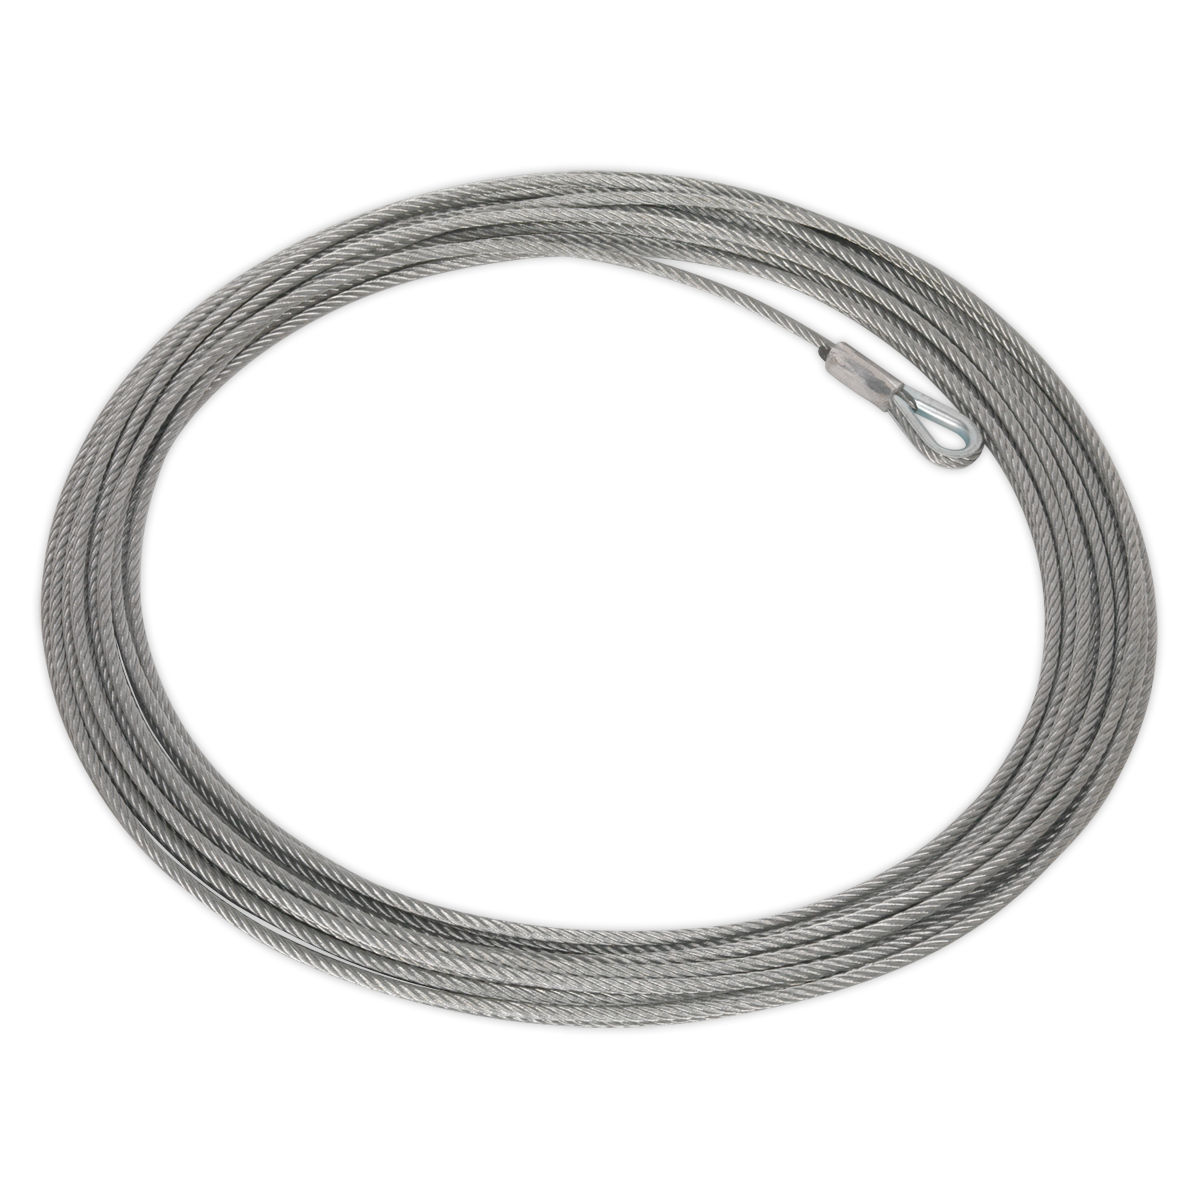 Wire Rope (Ø4.8mm x 15.2m) for ATV1135 - ATV1135.WR - Farming Parts